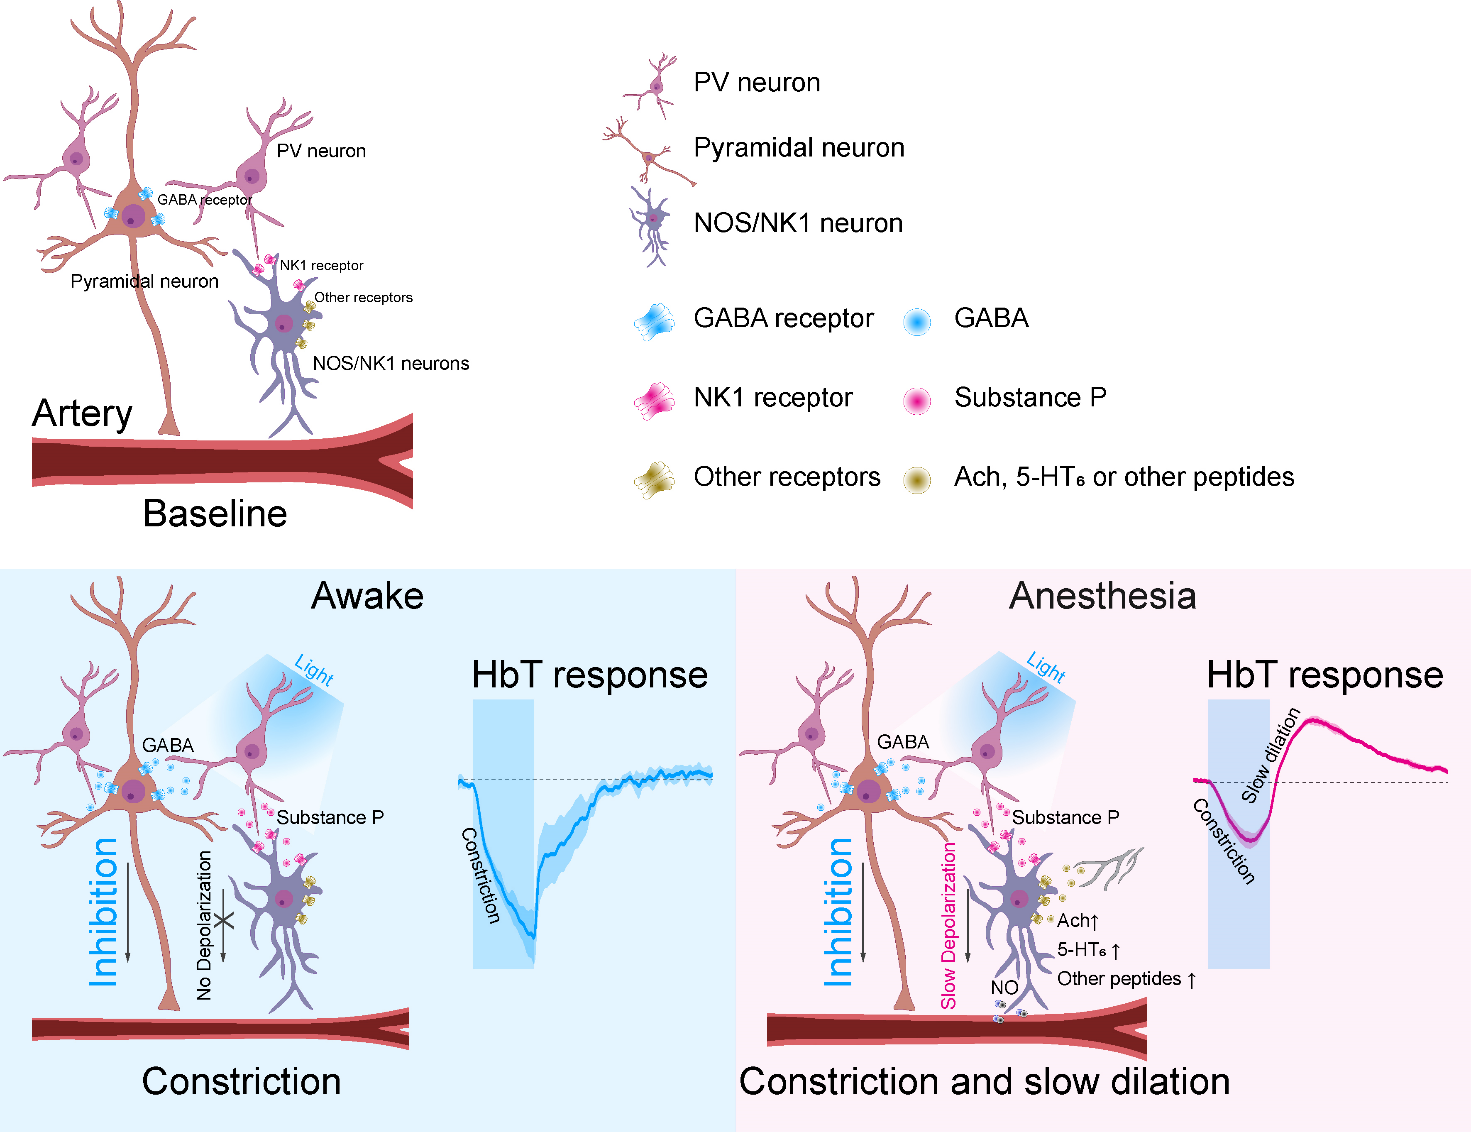 Figure 1. Role of PV neuron activity in the awake and anesthetized brain. When the inhibitory PV neuron is activated in the awake brain, excitatory neurons are inhibited and vasoconstriction is observed (left). In the anesthetized brain, substance P is secreted by the PV neurons, which activates nNOS neurons and causes slow vasodilation (right). Optical imaging was used to measure HbT (total hemoglobin), which is used to infer the level of blood flow.